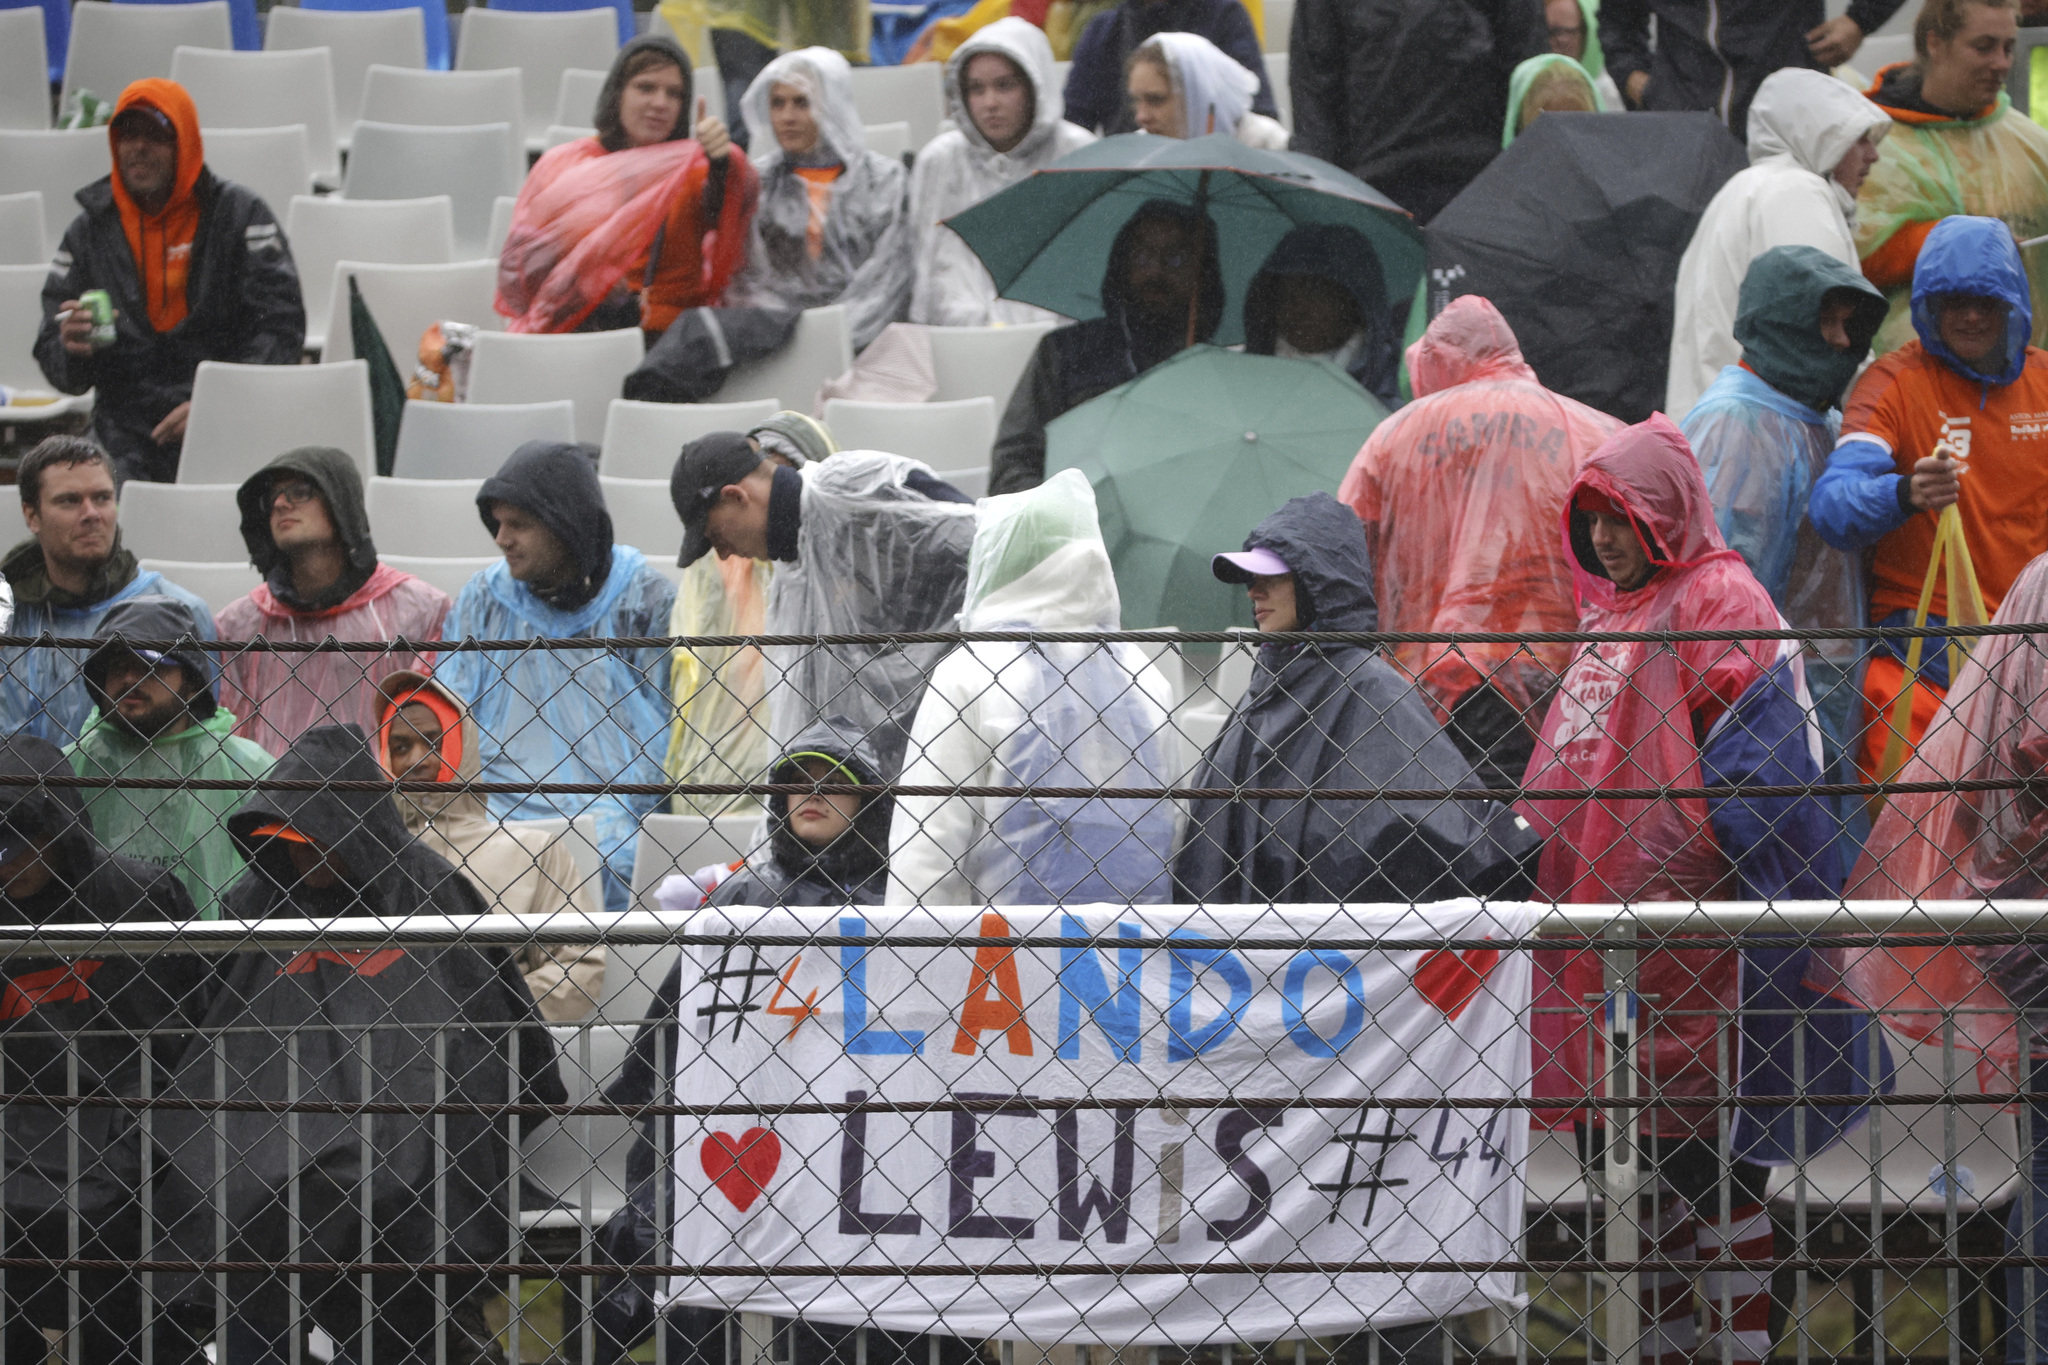 Spectators wait in the stands during a rain delay at the Formula One Grand Prix at the lt;HIT gt;Spa lt;/HIT gt;-Francorchamps racetrack in lt;HIT gt;Spa lt;/HIT gt;, Belgium, Sunday, Aug. 29, 2021. (AP Photo/Olivier Matthys)